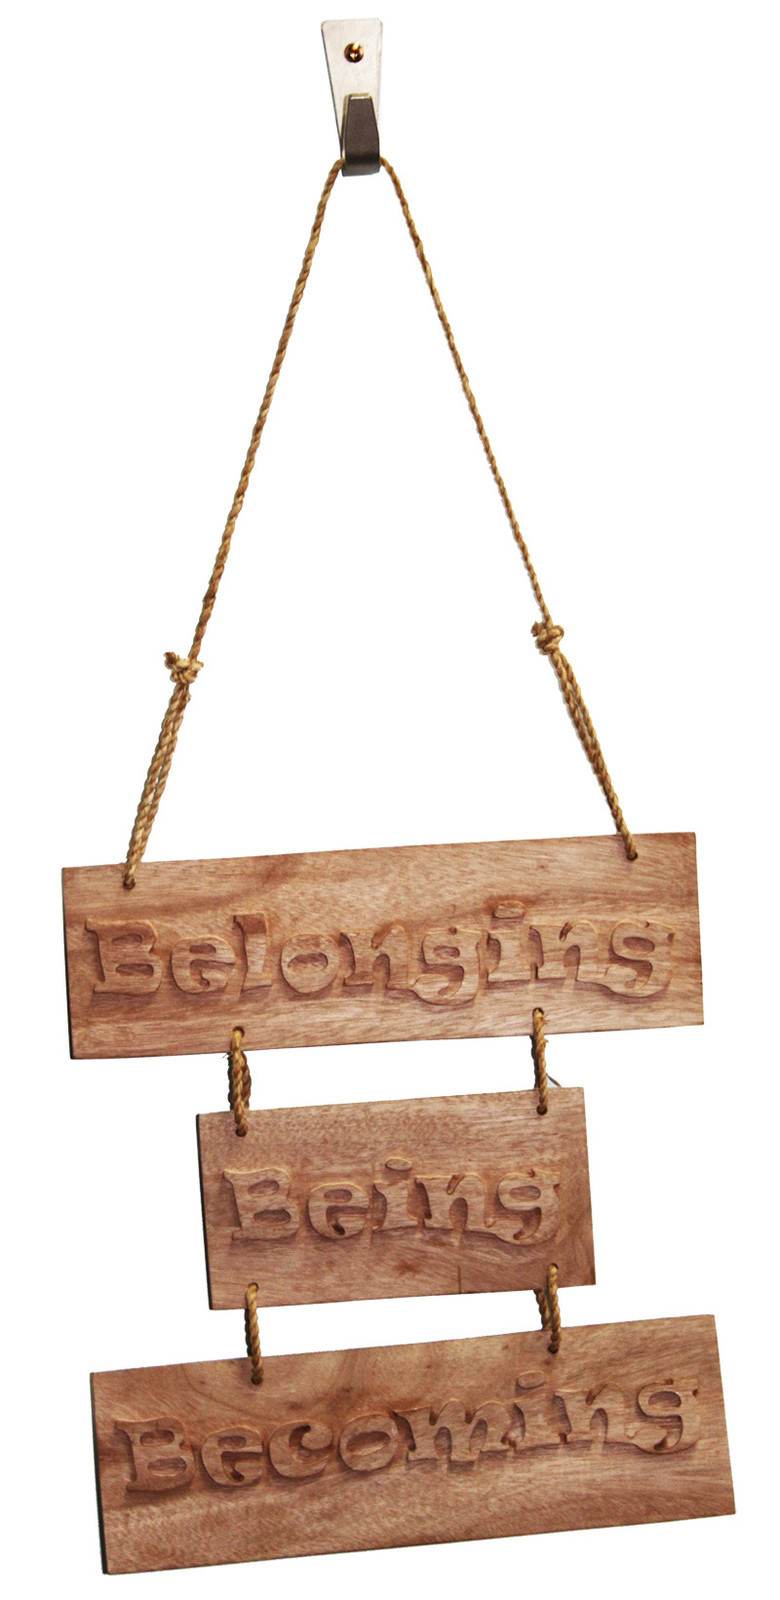 Hand Carved Wooden Signs - Being, Belonging, Becoming